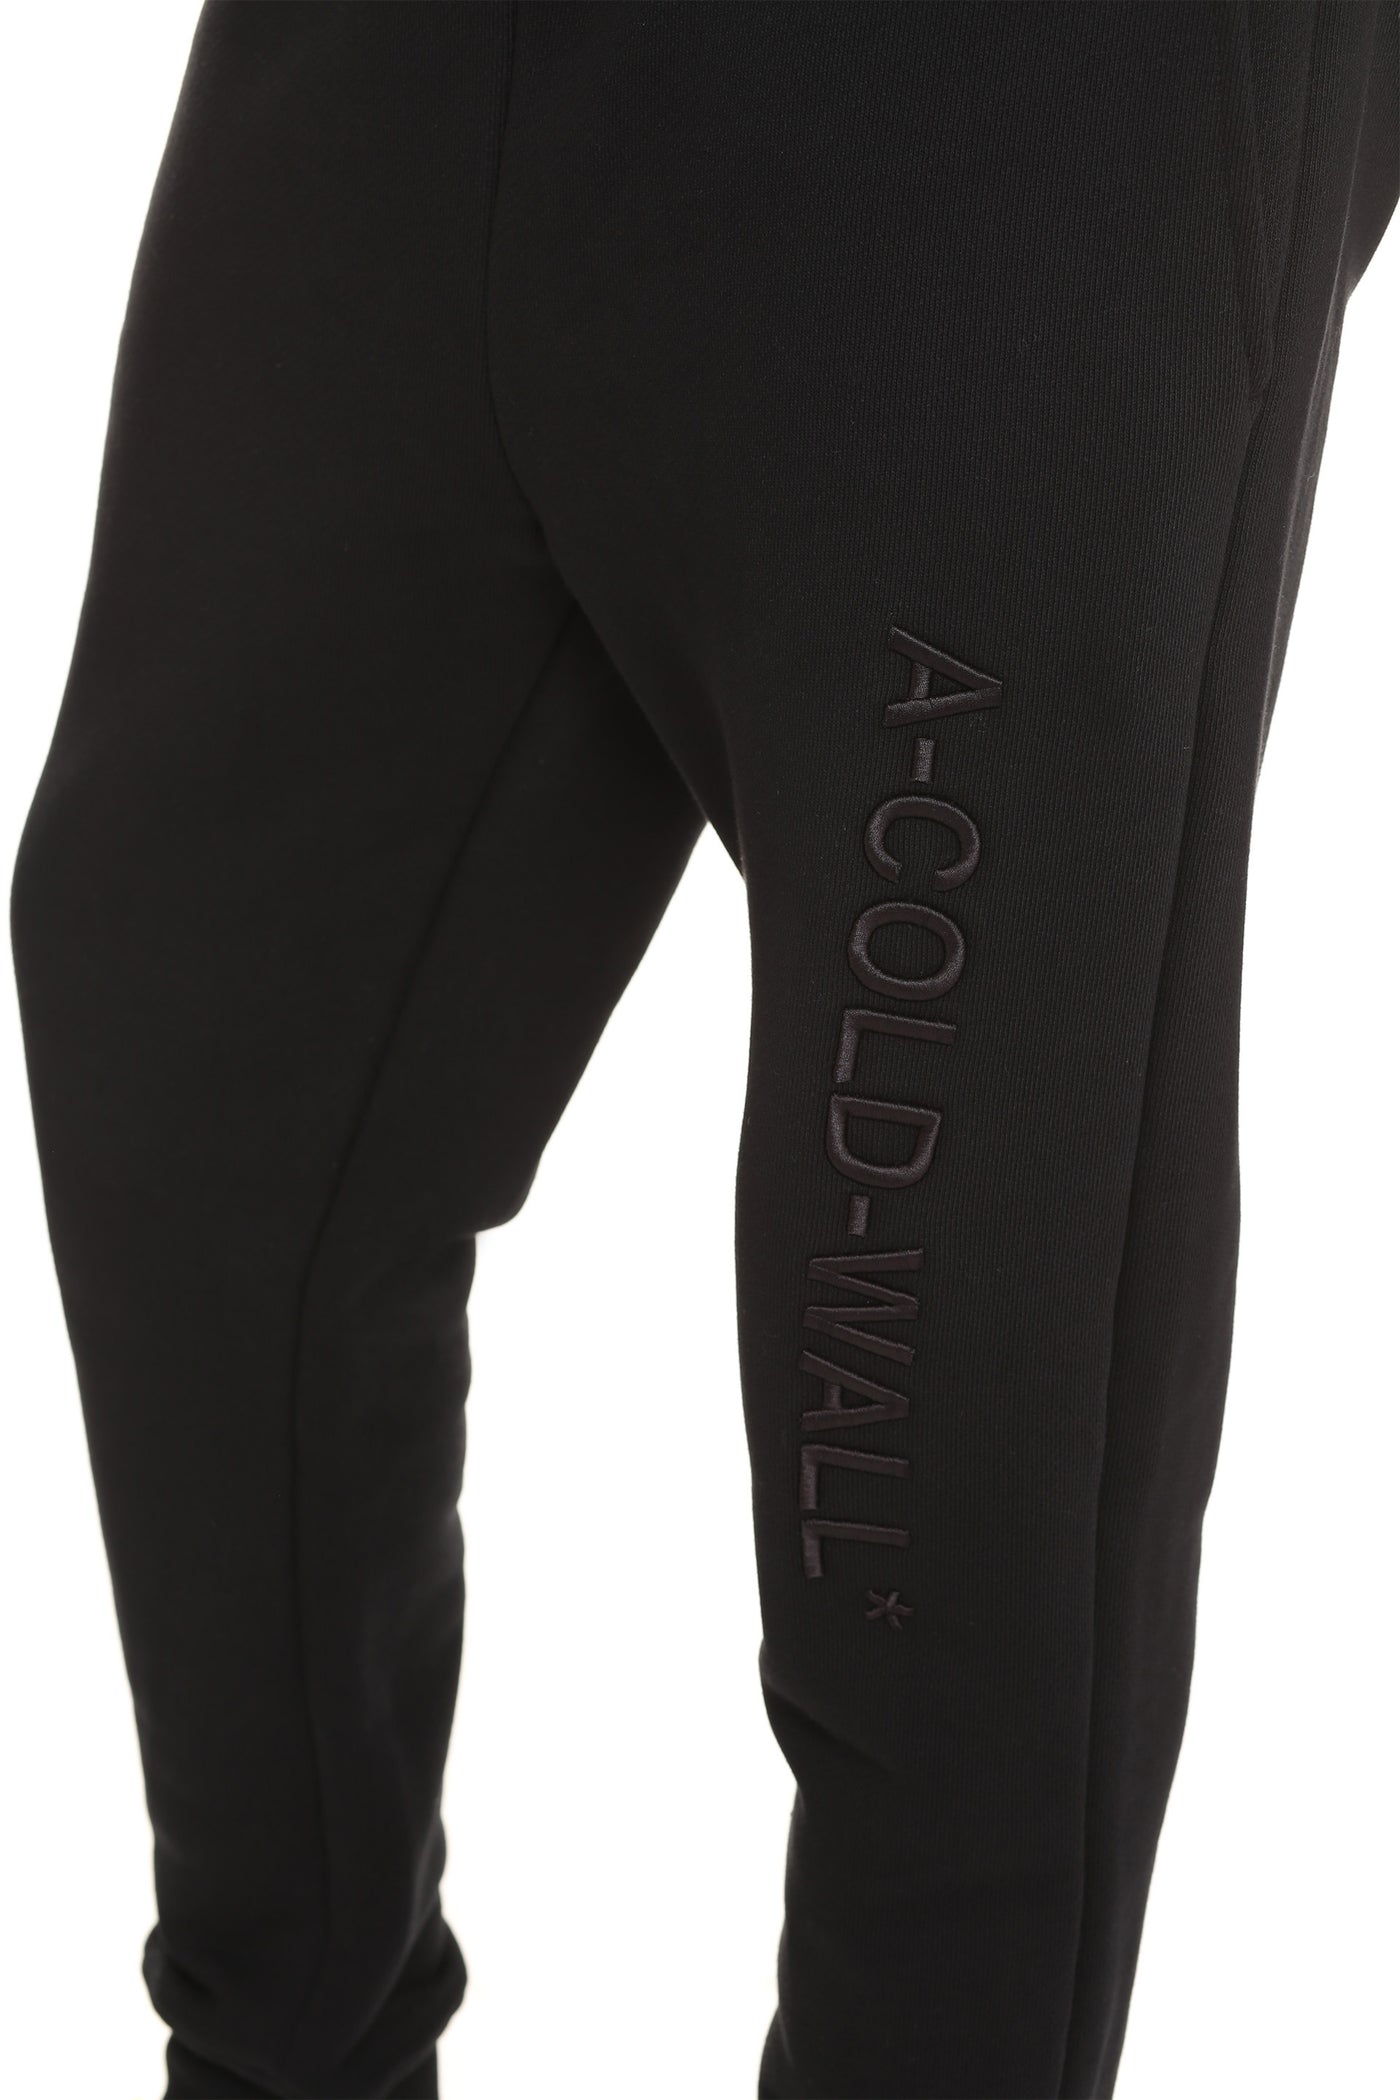 BLACK A-COLD-WALL STRETCH COTTON TRACK-PANTS